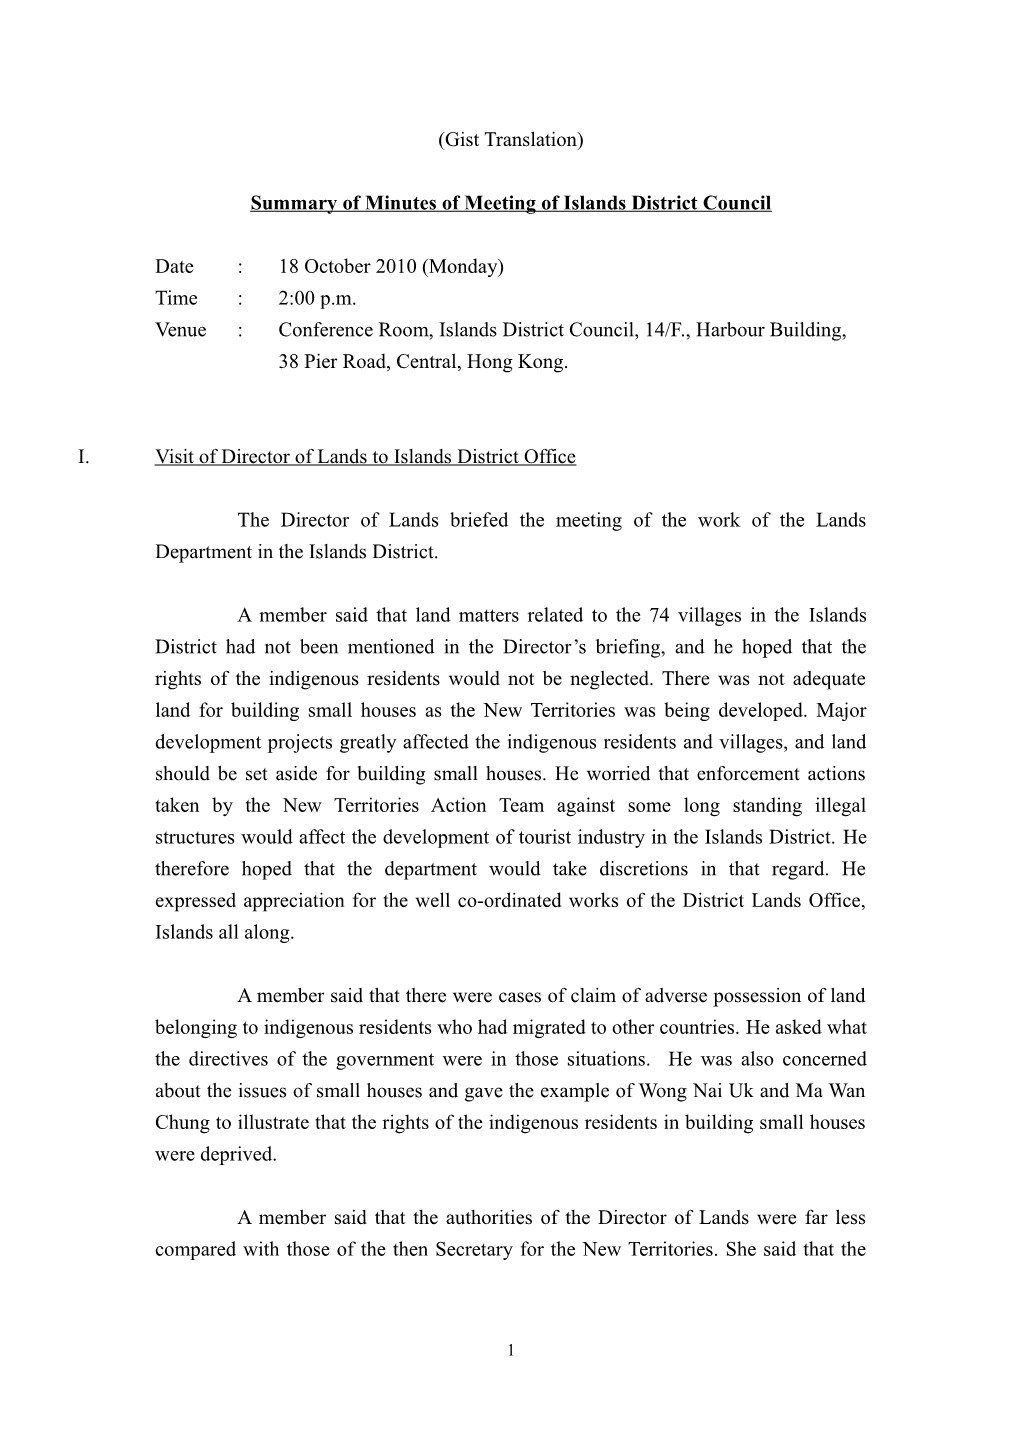 Summary of Minutes of Meeting of Islands District Council